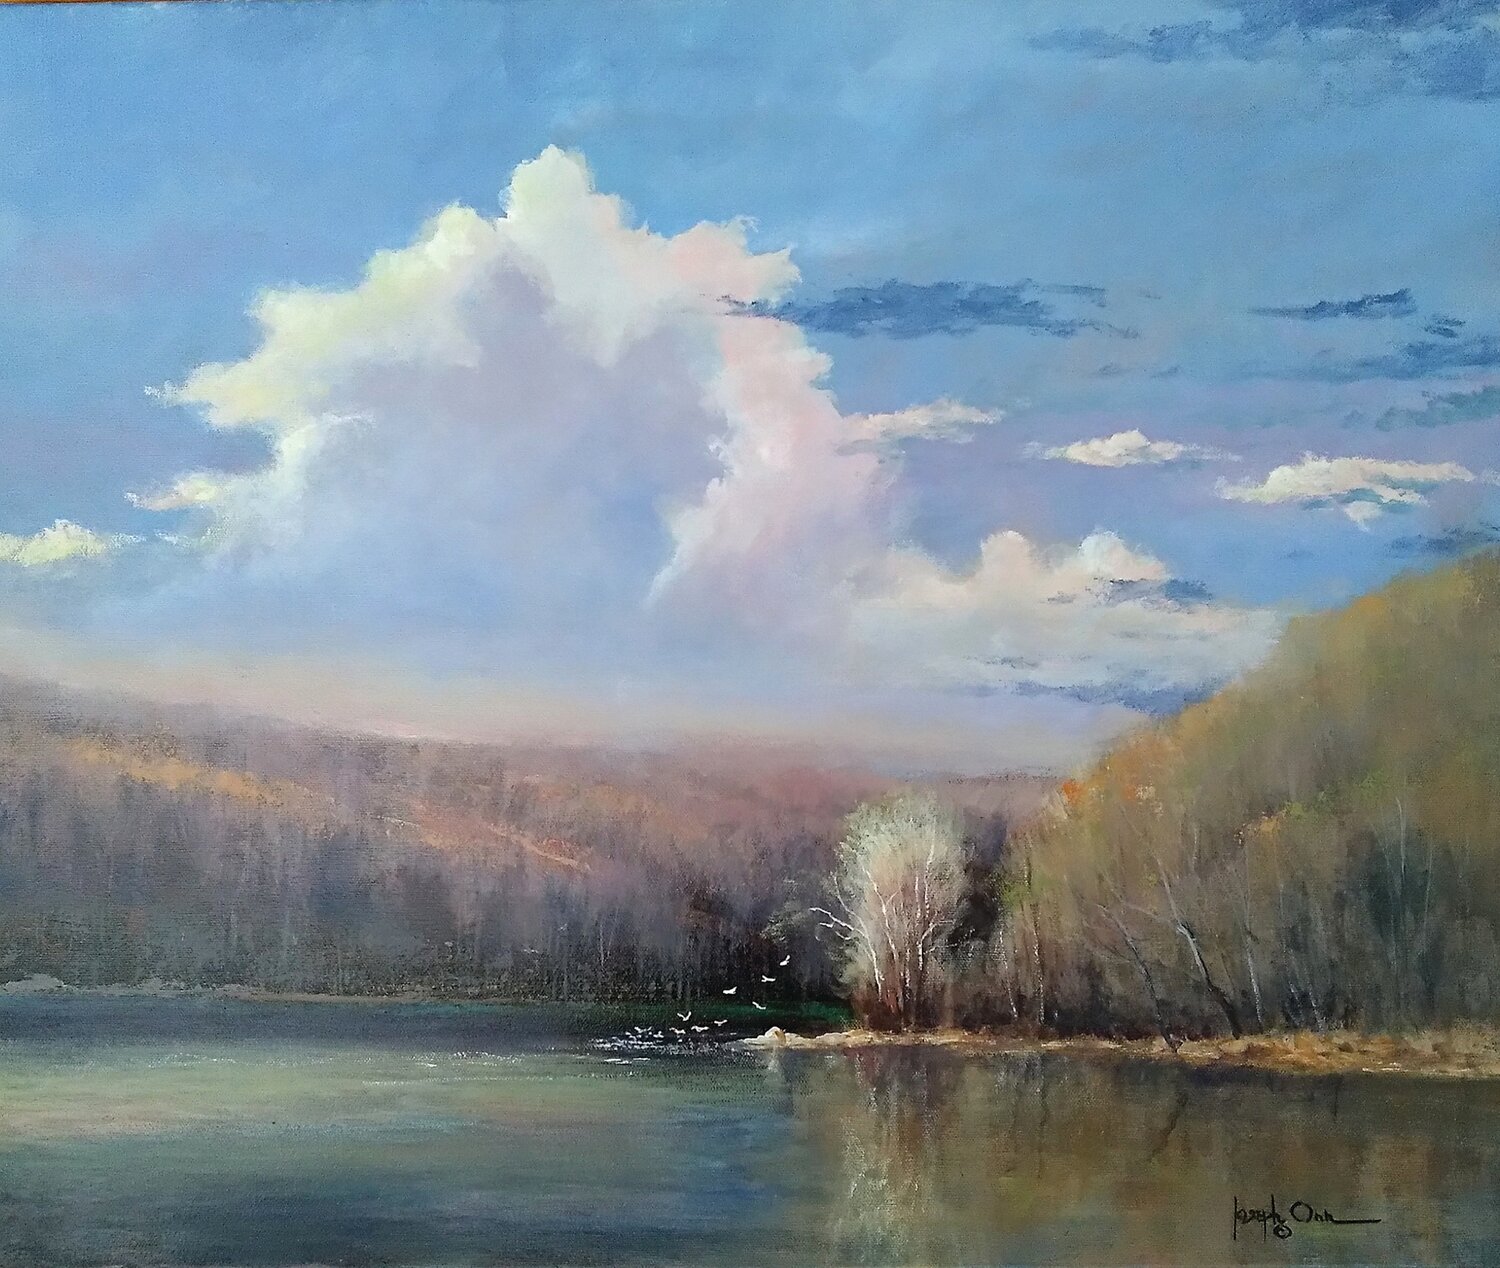 “Breeze Point Afternoon” is an acrylic painting by Joseph Orr.